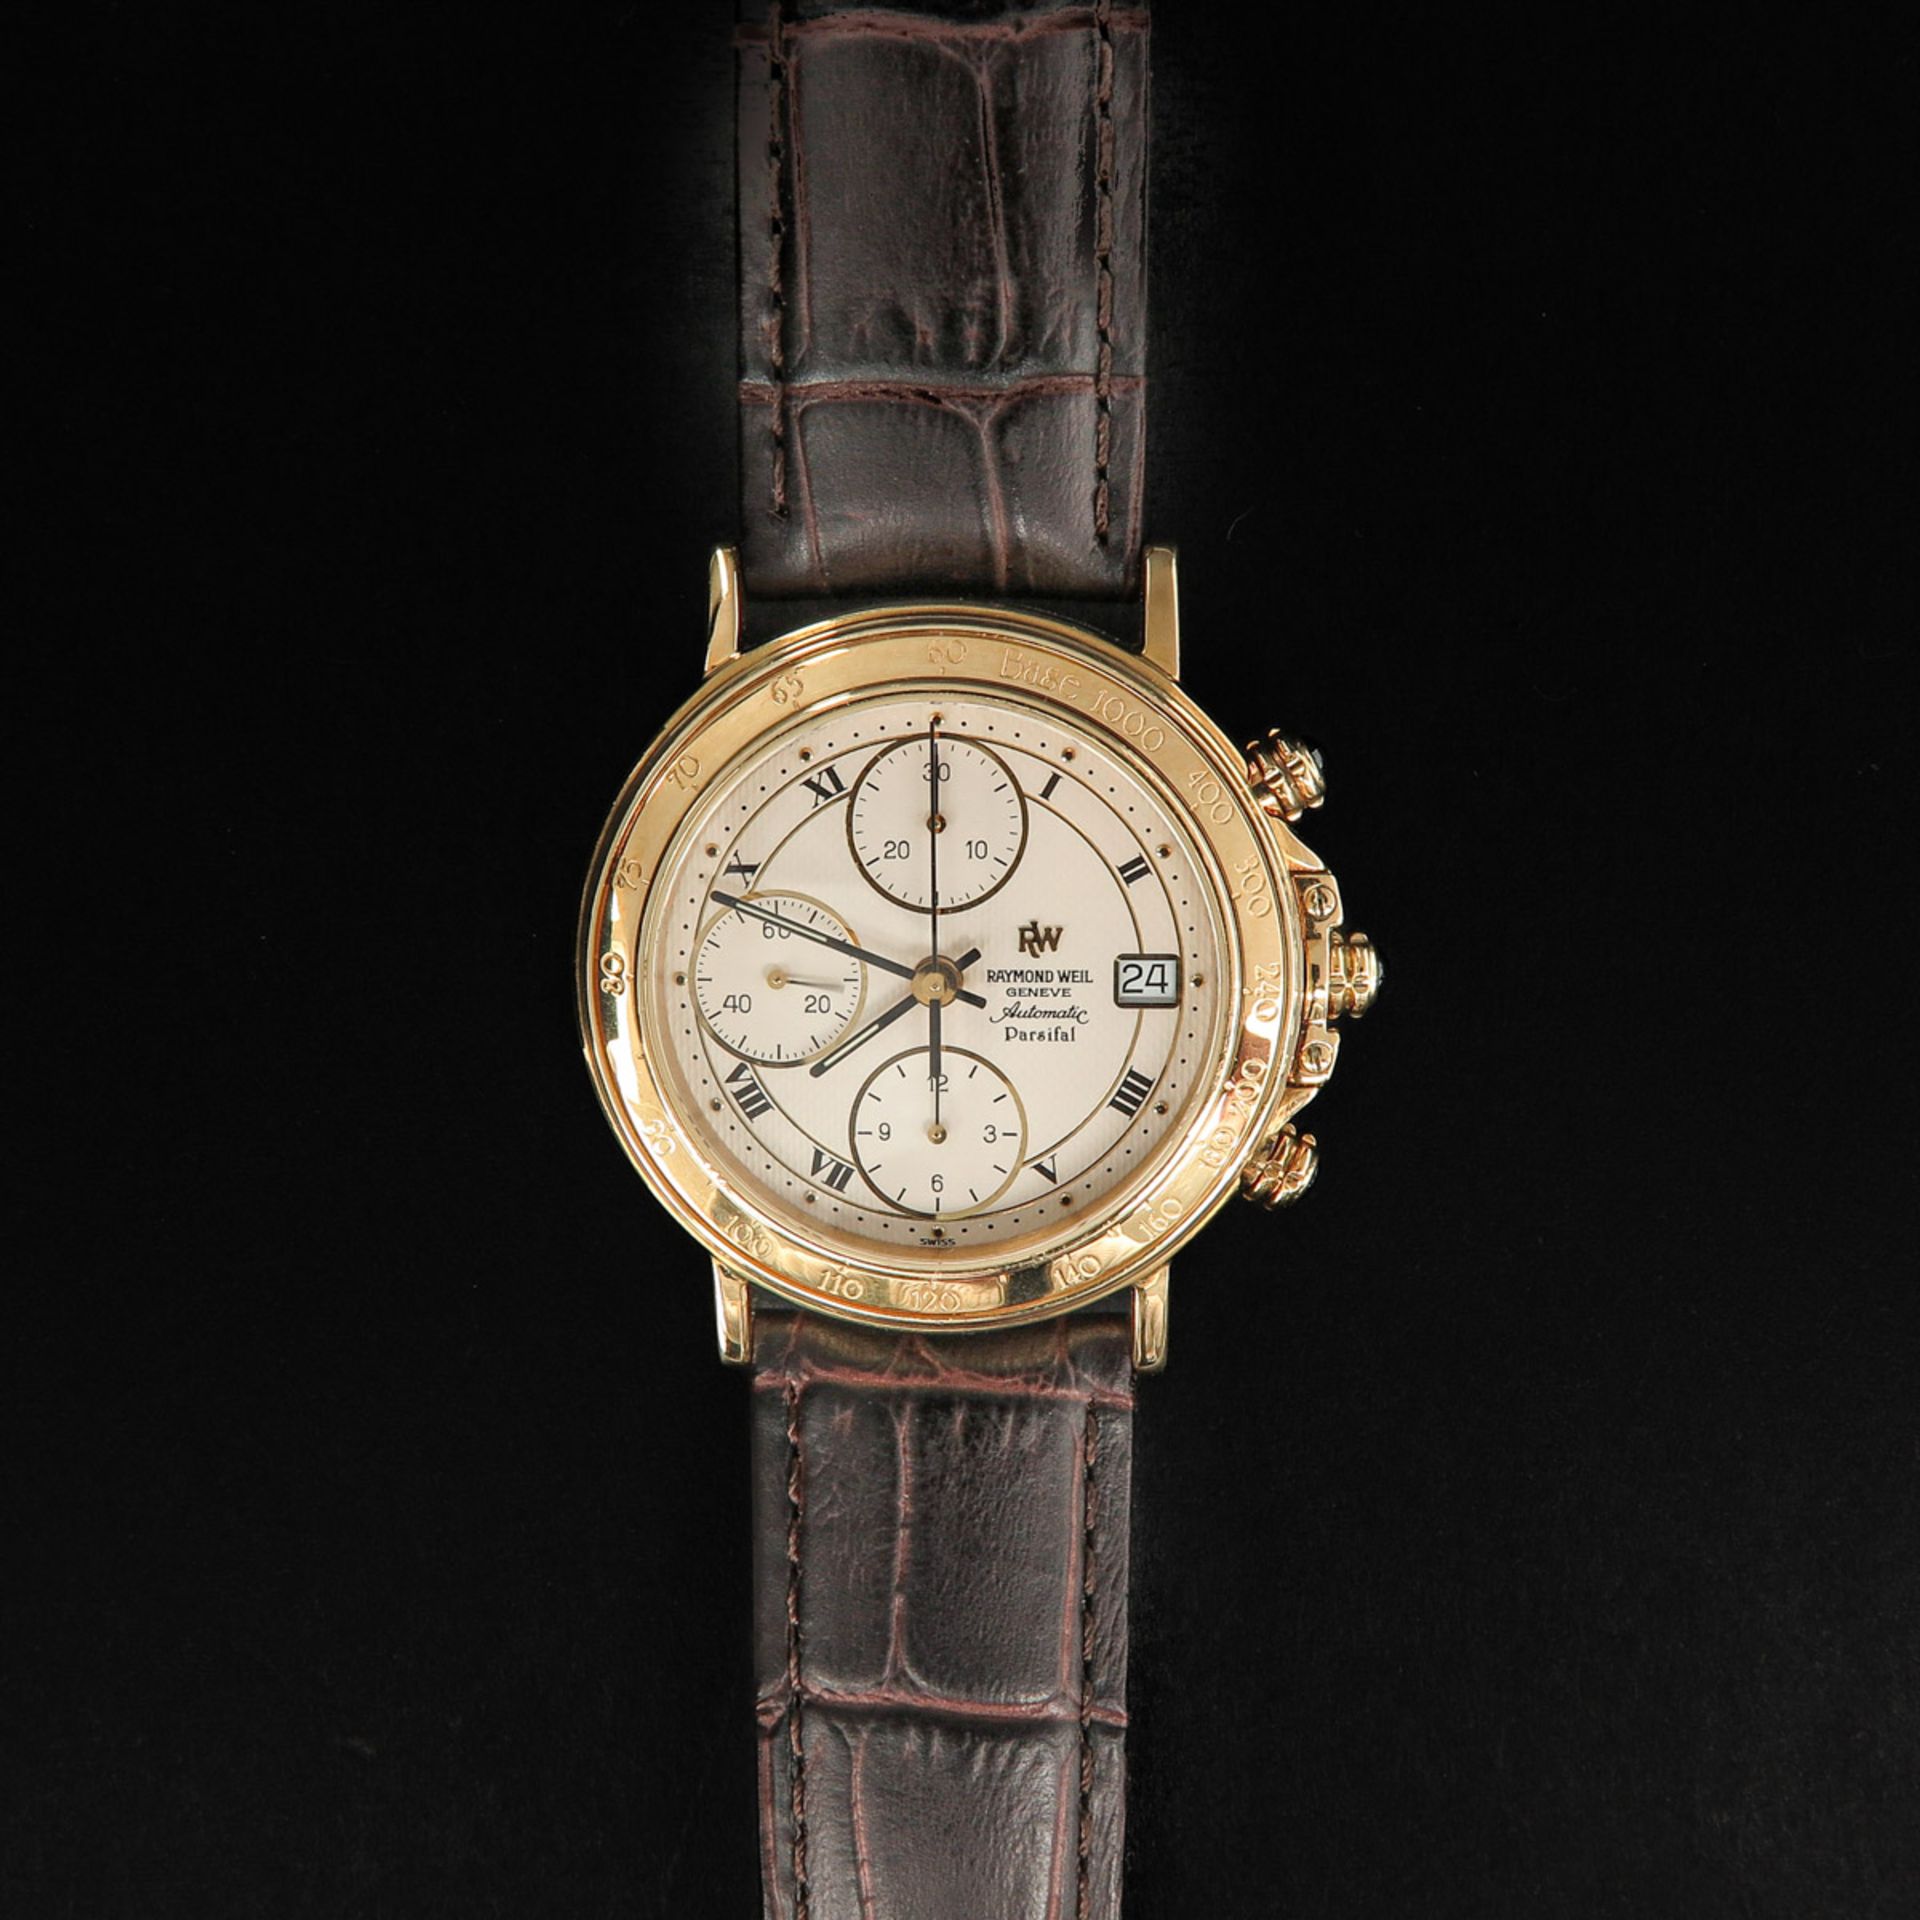 A Mens Raymond Weil Watch - Image 3 of 6